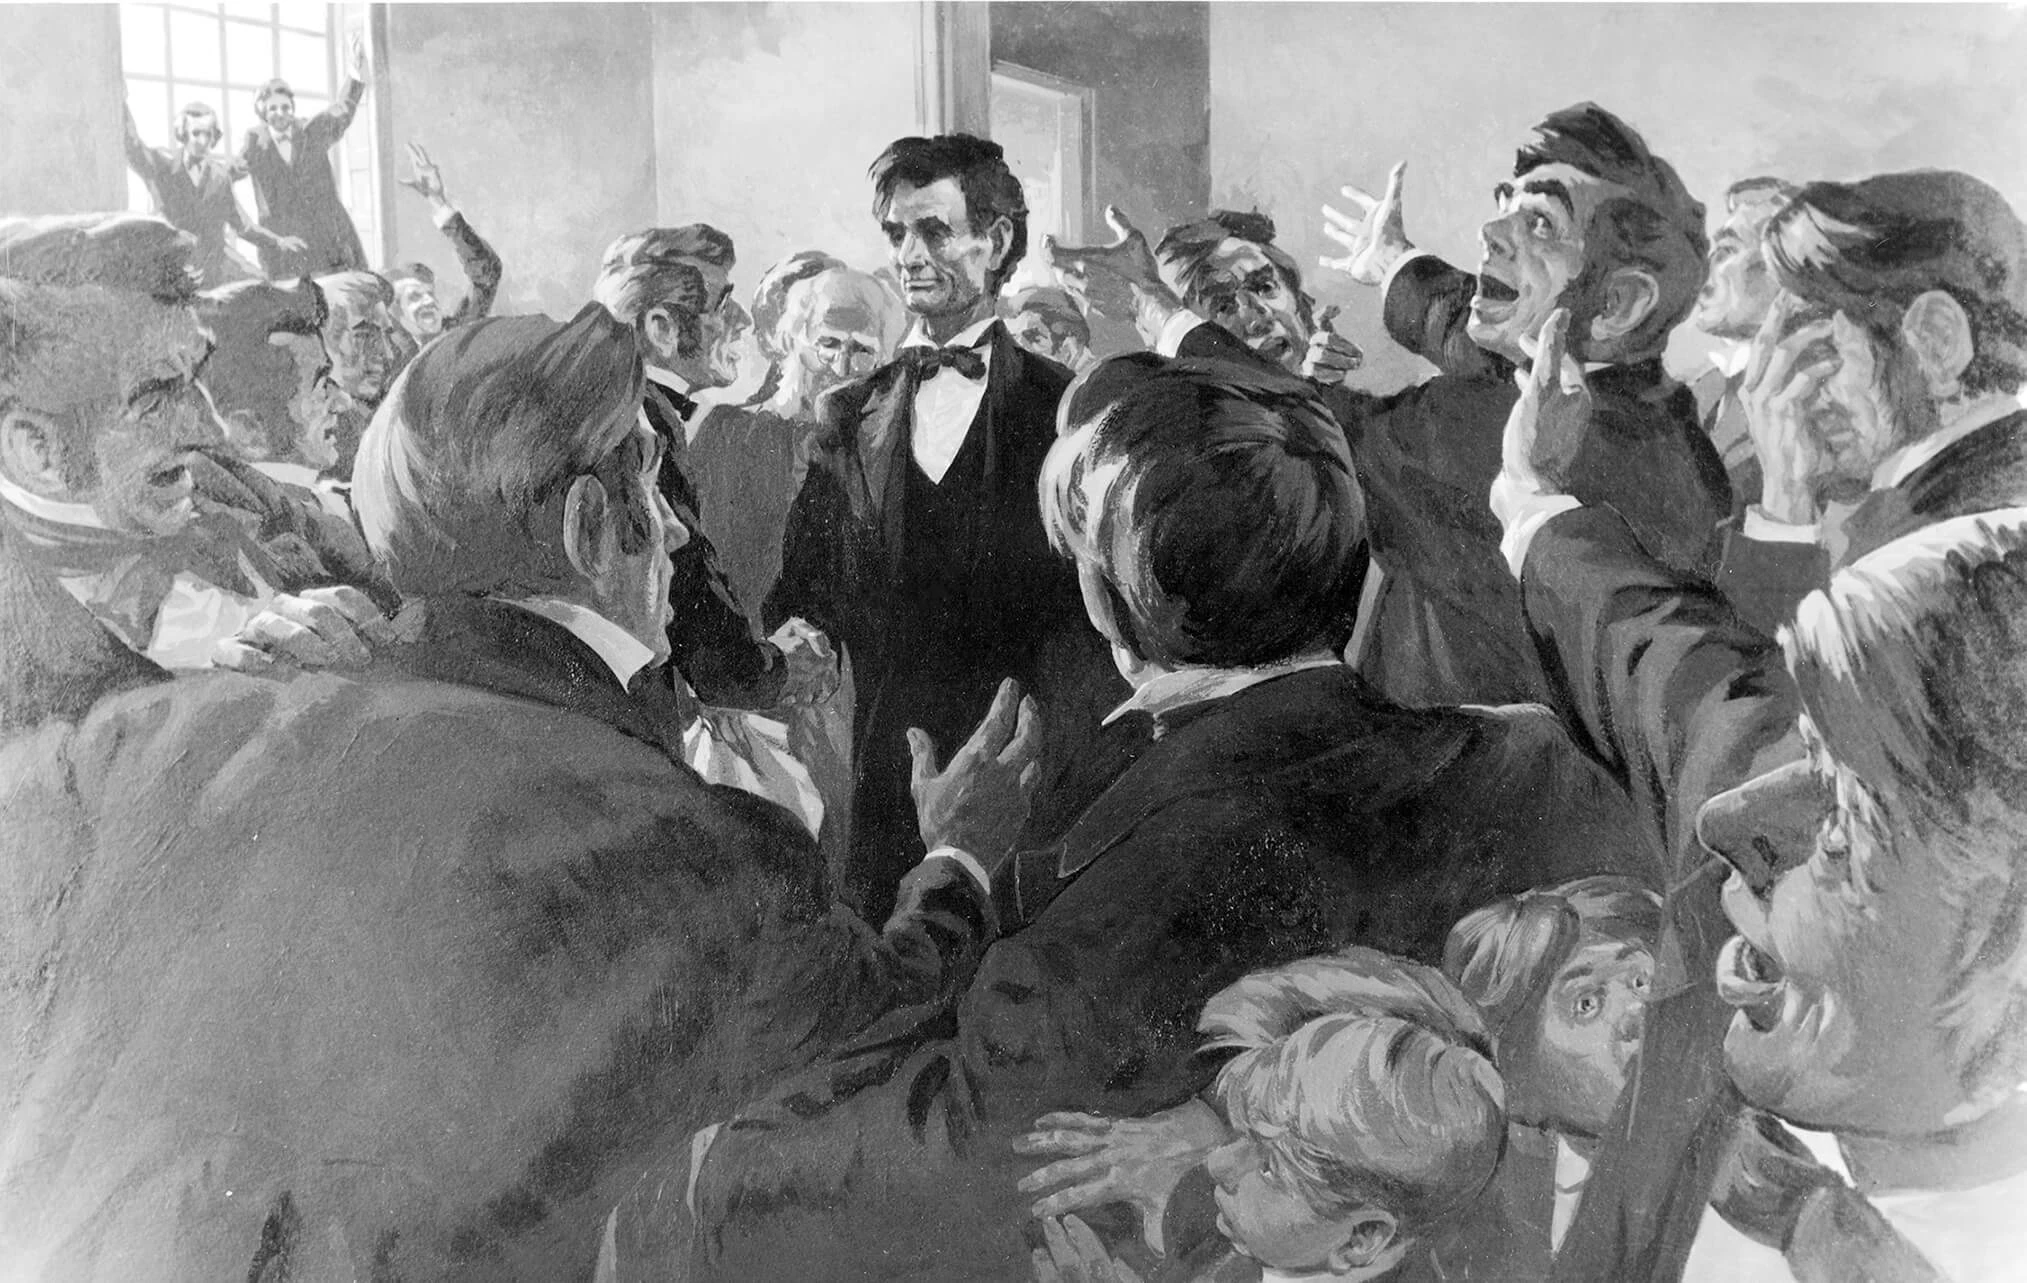 Drawing of Lincoln as the focal point, surrounded by men cheering and celebrating.